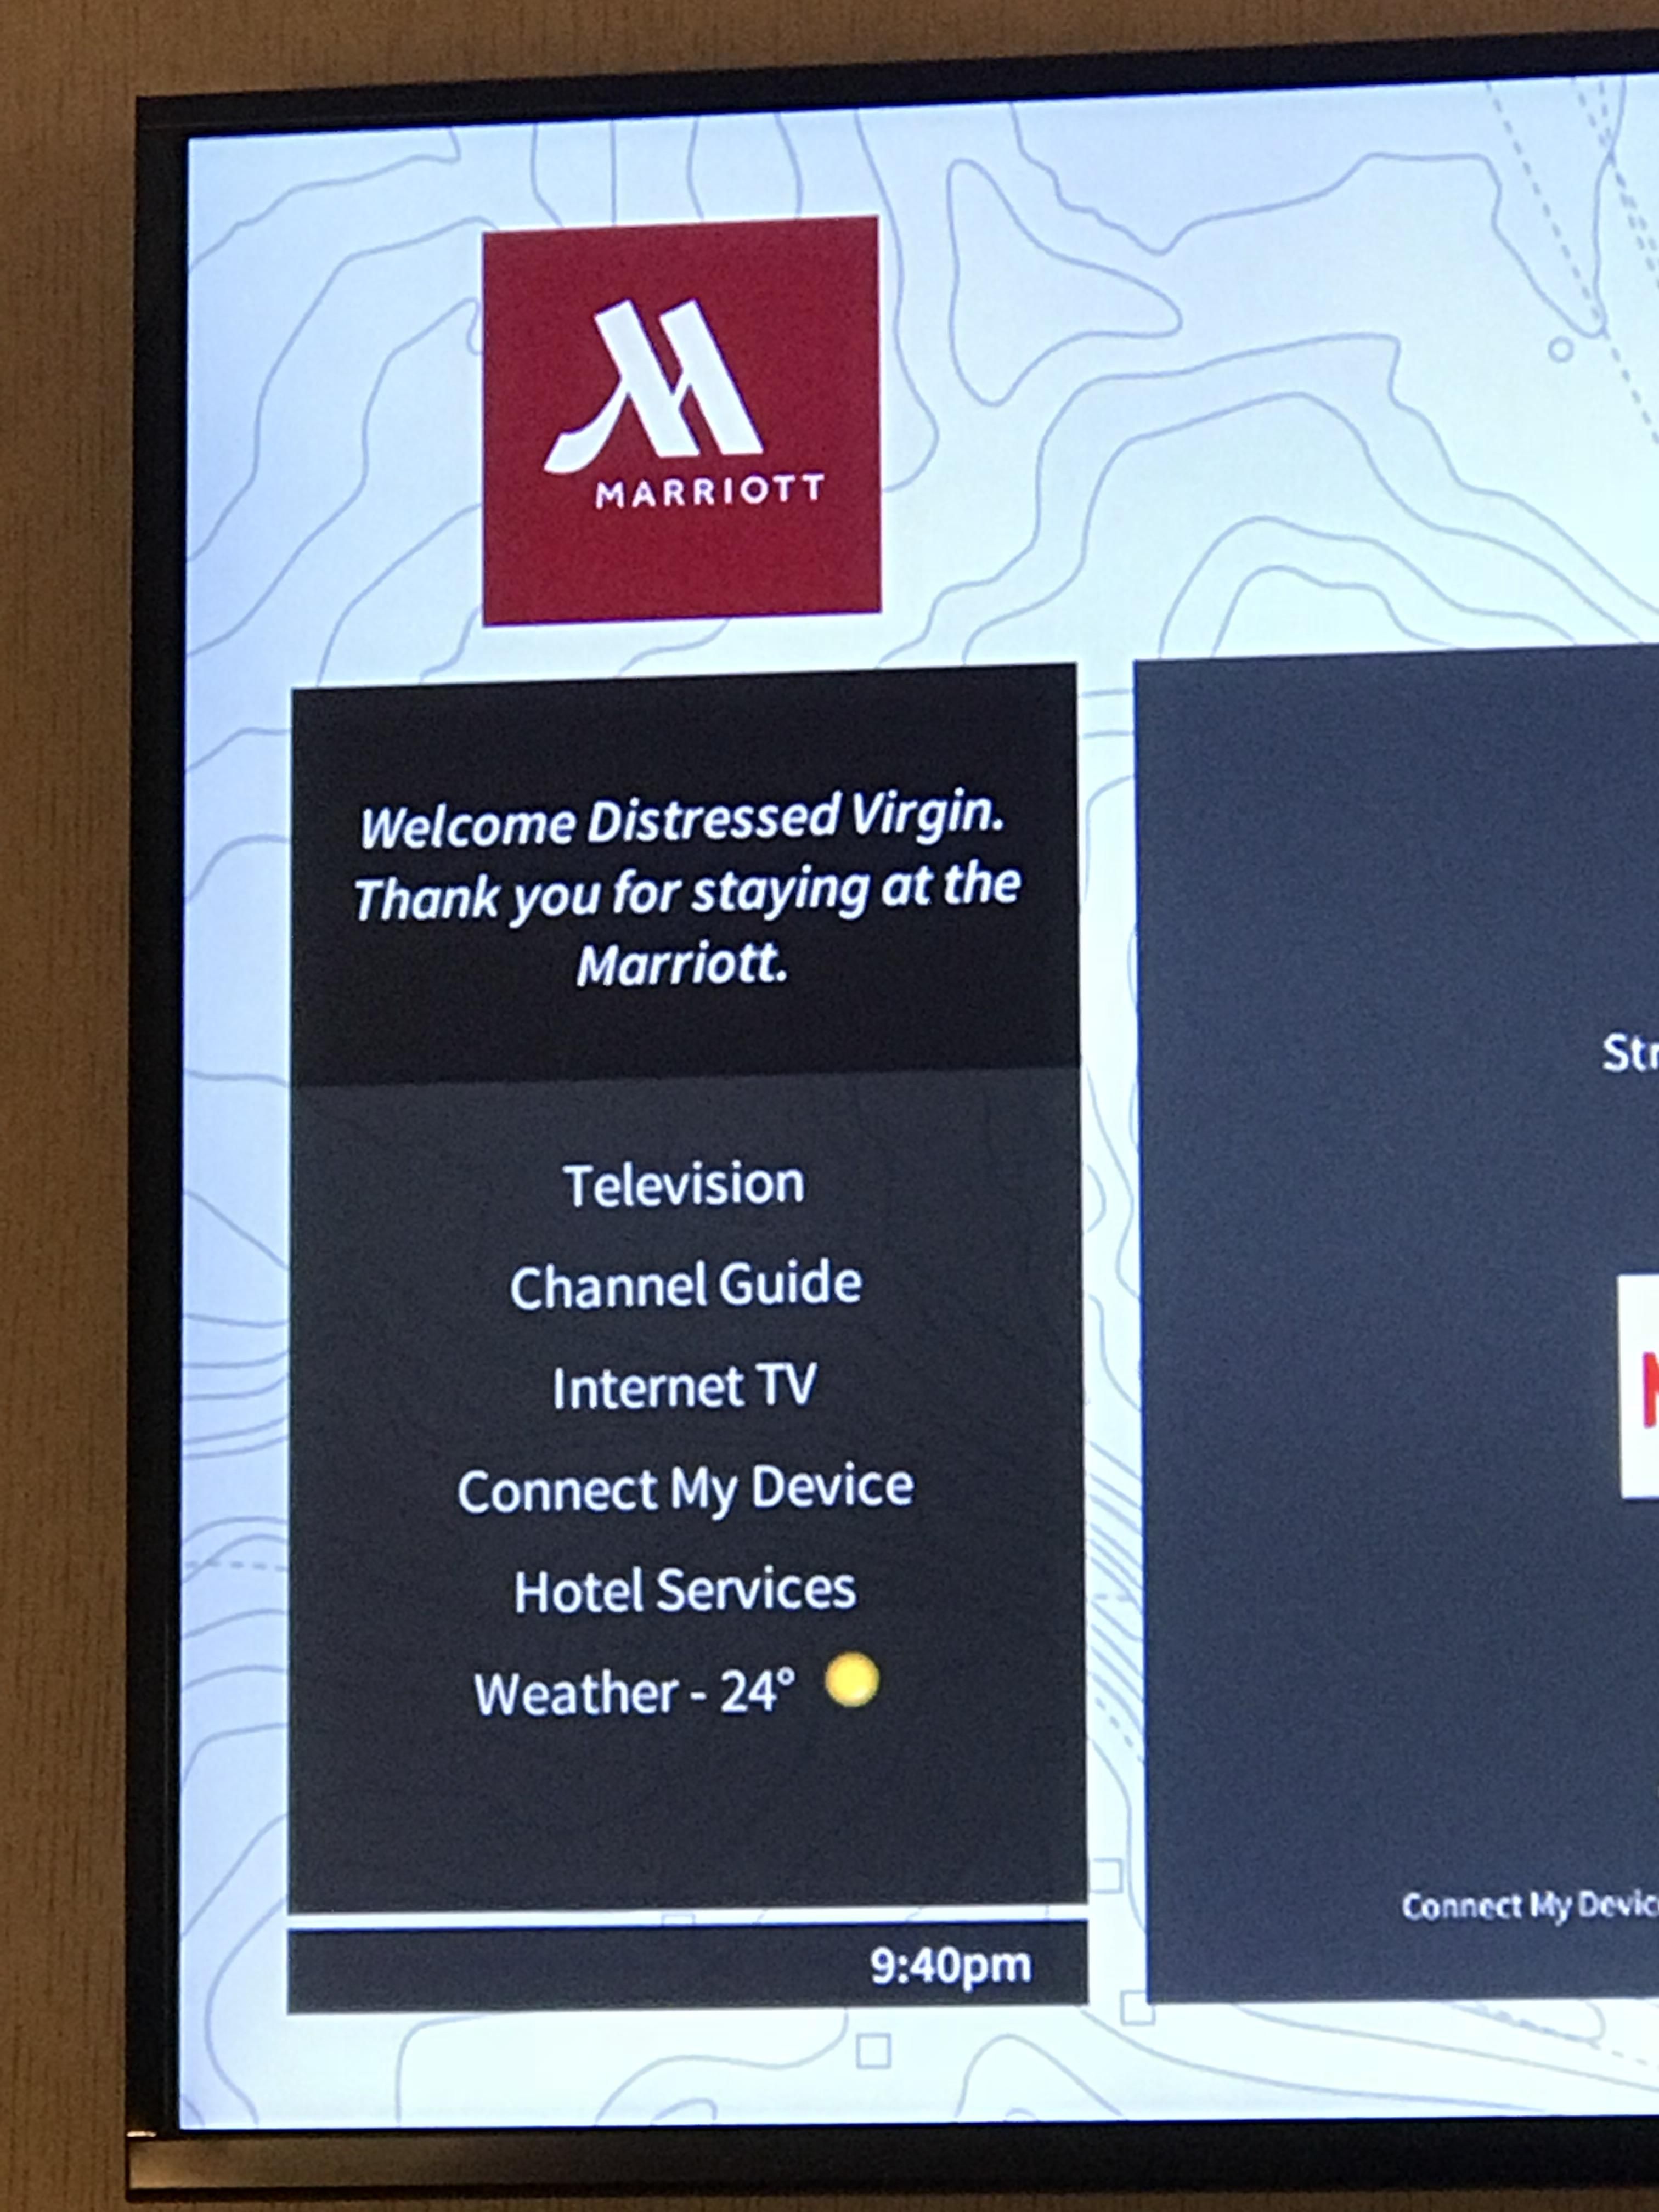 Earlier this year our Virgin Atlantic flight was rerouted to Atlanta at the last minute, so we were put up in a Marriott for the night. The choice of welcome message was a bit insulting...